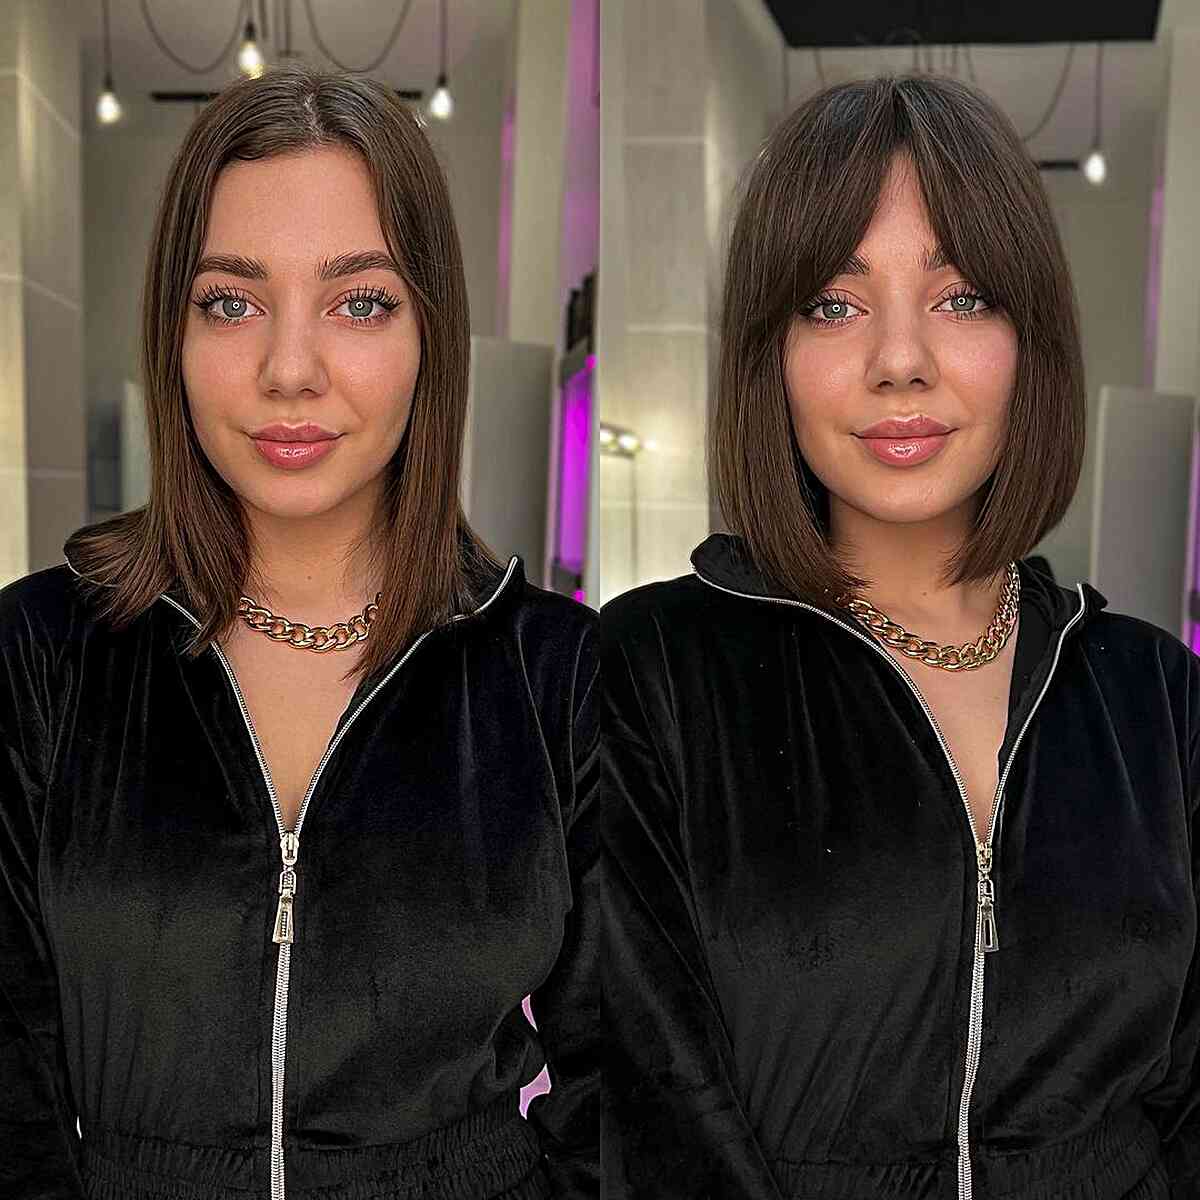 29 Best Ways to Wear Curtain Bangs for Straight Hair, According to Stylists